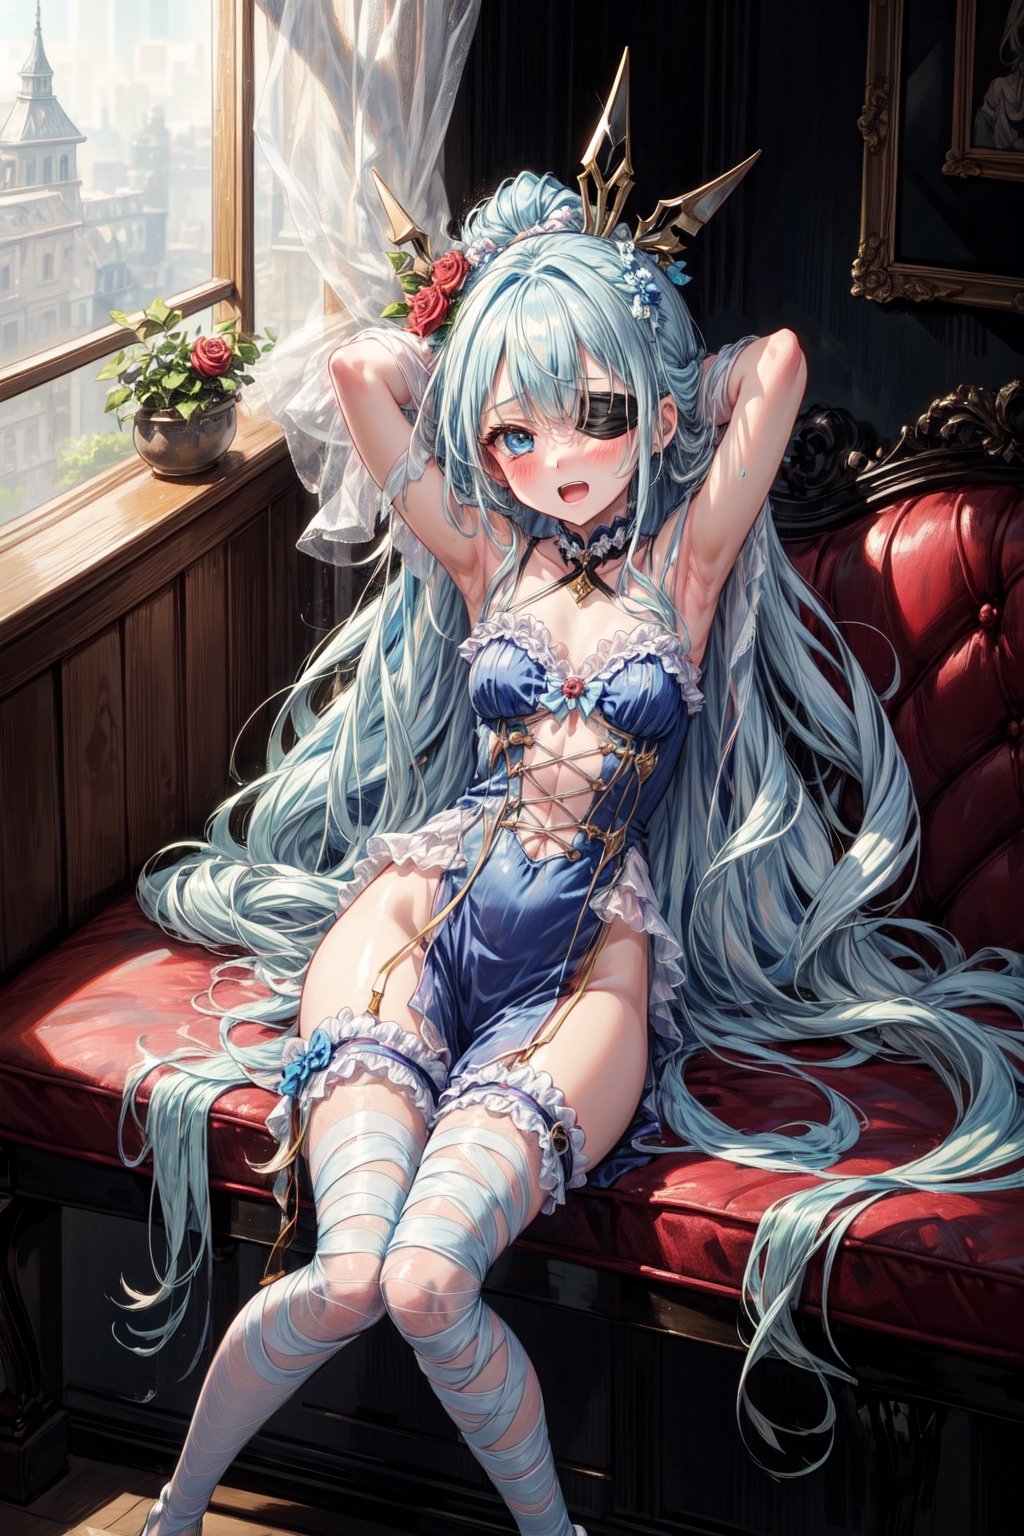 masterpiece, best quality, extremely detailed, (illustration, official art:1.1), 1 girl ,(((( light blue long hair)))), ,(((( light blue long hair)))),light blue hair, ,10 years old, long hair ((blush)) , cute face, big eyes, masterpiece, best quality,(((((a very delicate and beautiful girl))))),Amazing,beautiful detailed eyes,blunt bangs((((little delicate girl)))),tareme(true beautiful:1.2), sense of depth,dynamic angle,,,, affectionate smile, (true beautiful:1.2),,(tiny 1girl model:1.2),)(flat chest),(best quality,8k,highres, masterpiece:1.2), (((,rose patternEye Patch)))、、long、(​masterpiece、top-quality、top-quality、Official art、Beautifully Aesthetic:1.2)、 Black blindfold, long、独奏, 1girl in, open open mouth, bangss, A smile, The upper part of the body, bandaged, Extreme details、highestdetailed、Playful patterns、lively texture、unique visual effect、、piercings、耳环、The tattoo、goth_punk, 1girl in, 独奏,、top-quality, Photorealistic, An ultra-fine illustrations, beautiful attractive anime girl, Slender body, one girls, a photo of girl, Full body shot, Beautiful blue eyes, Turned,耳环、hair adornments、jewely、((depression, sadness, melancholy)),tired expression,diadem,gothic maid uniform,(foreground),in an old mansion,hallway,dark,
